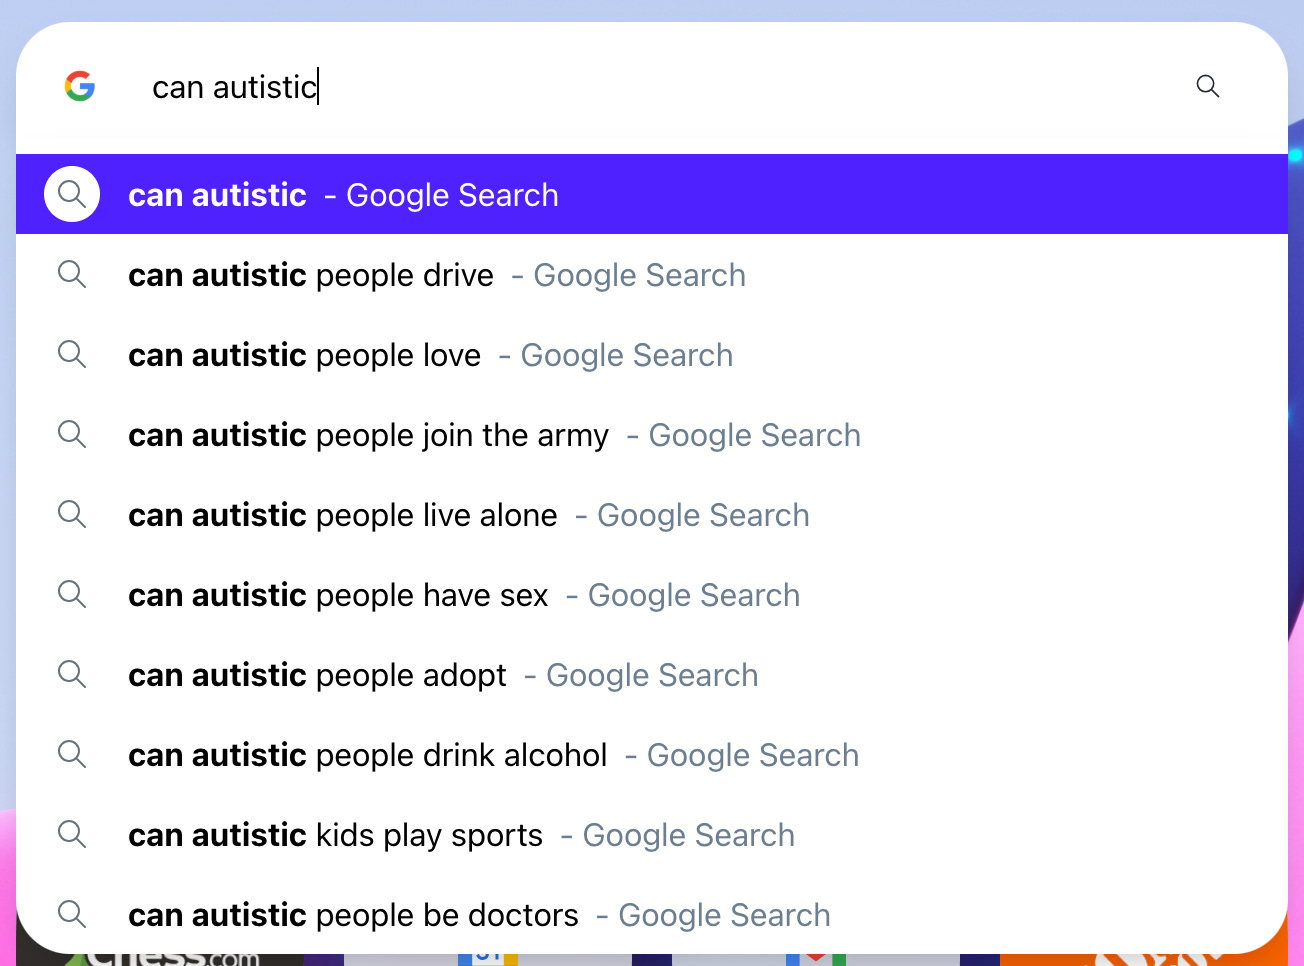 Google search results for ‘can autistic’ results: people drive, love, people join the army people live alone, have sex, adopt, drink alcohol, kids play sports, and be doctors.